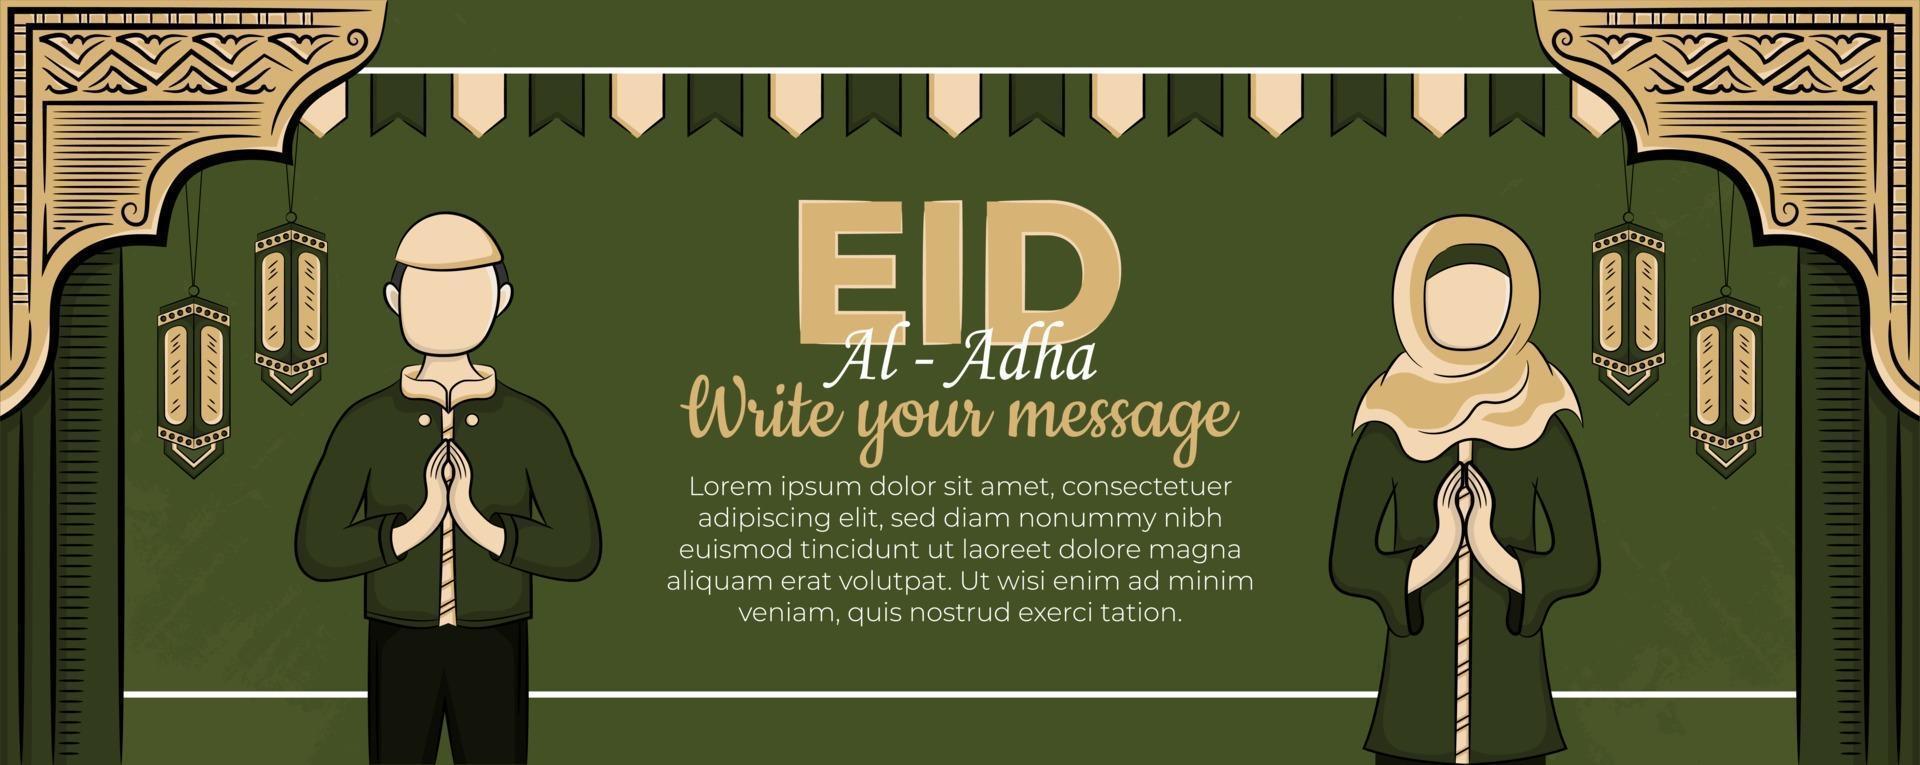 Eid al-adha banner template with Hand drawn Muslim People, Mosque, Lantern and islamic ornament in Green Background. vector